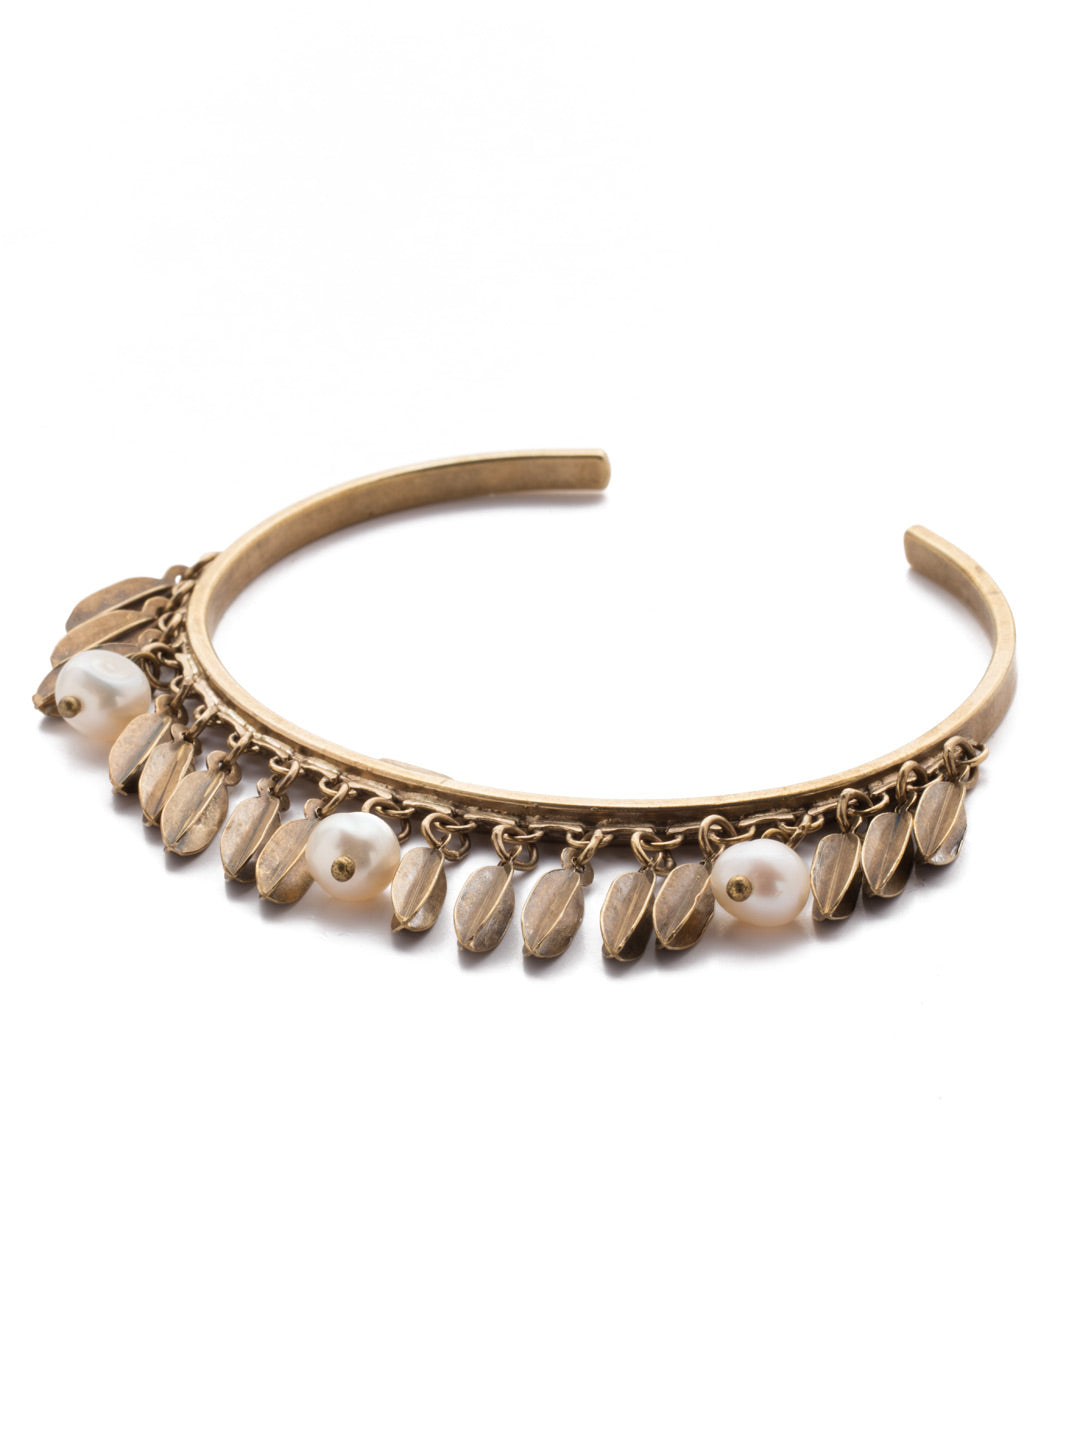 Twyla Cuff Bracelet - 4BES8AGMDP - <p>They Twyla Cuff Bracelet drips in fun metallic detail. Throw some pretty pearl pieces into the mix and you have a notice-me piece. From Sorrelli's Modern Pearl collection in our Antique Gold-tone finish.</p>